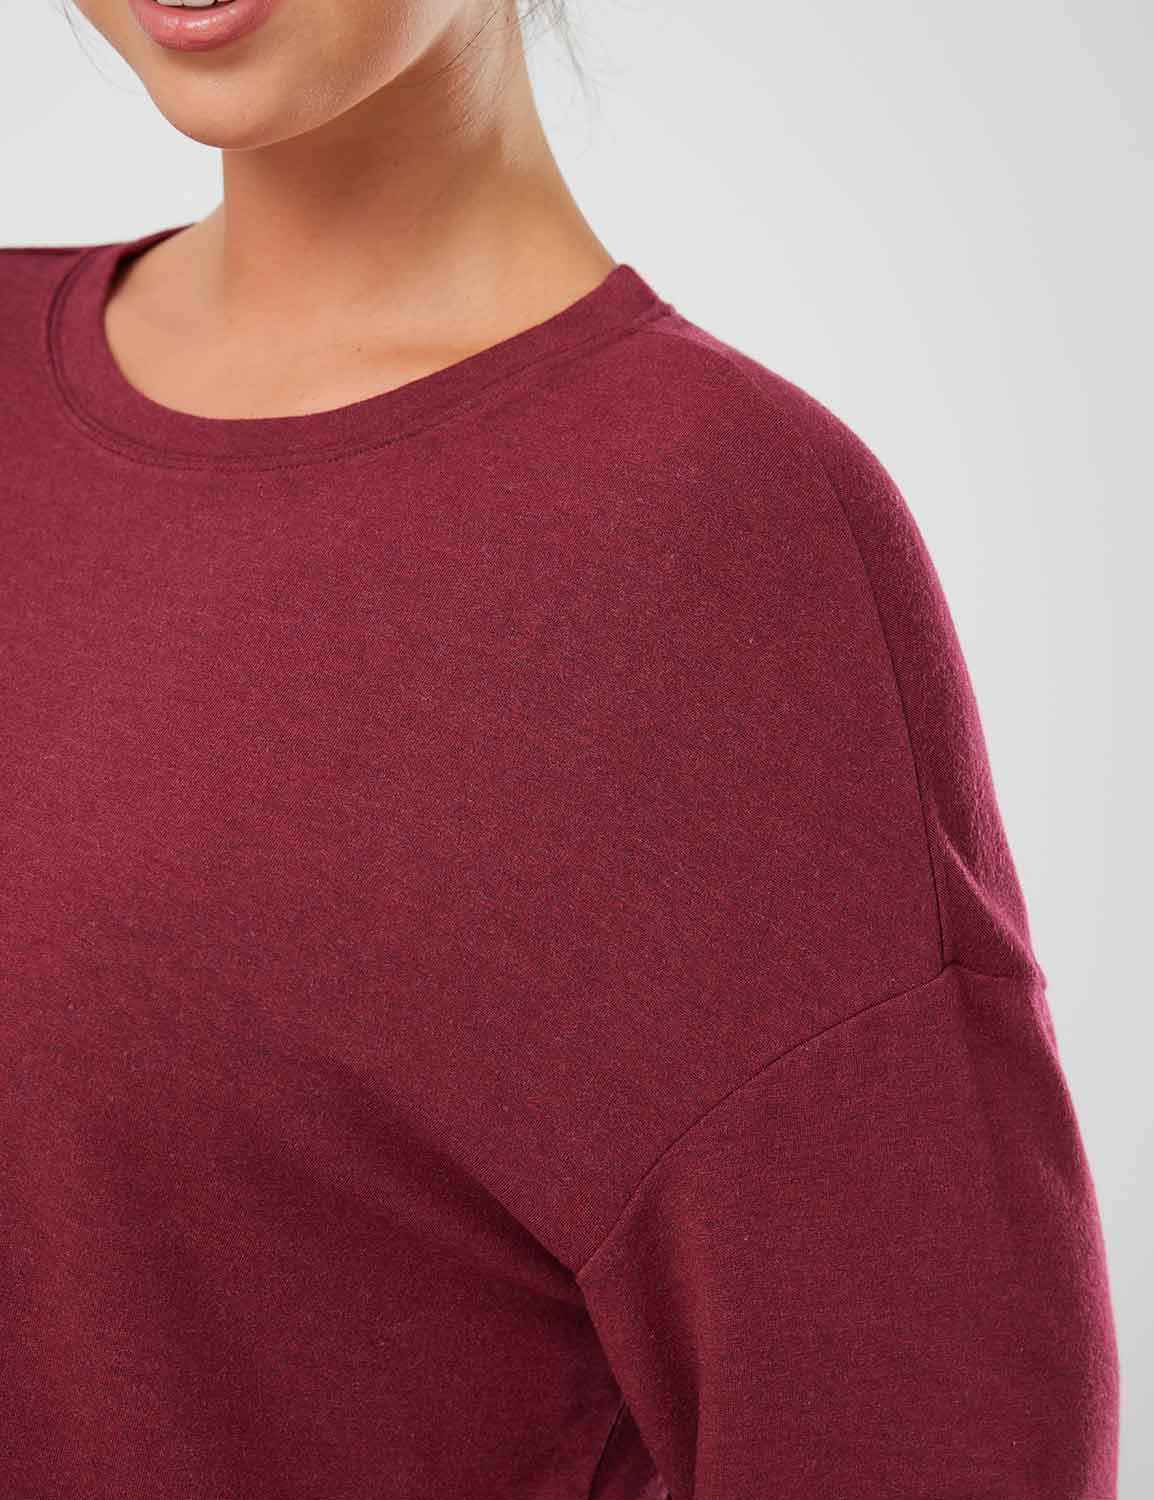 Baleaf Women's Evergreen Modal Oversized Cropped Top (Website Exclusive) dbd090 Wine Red Details